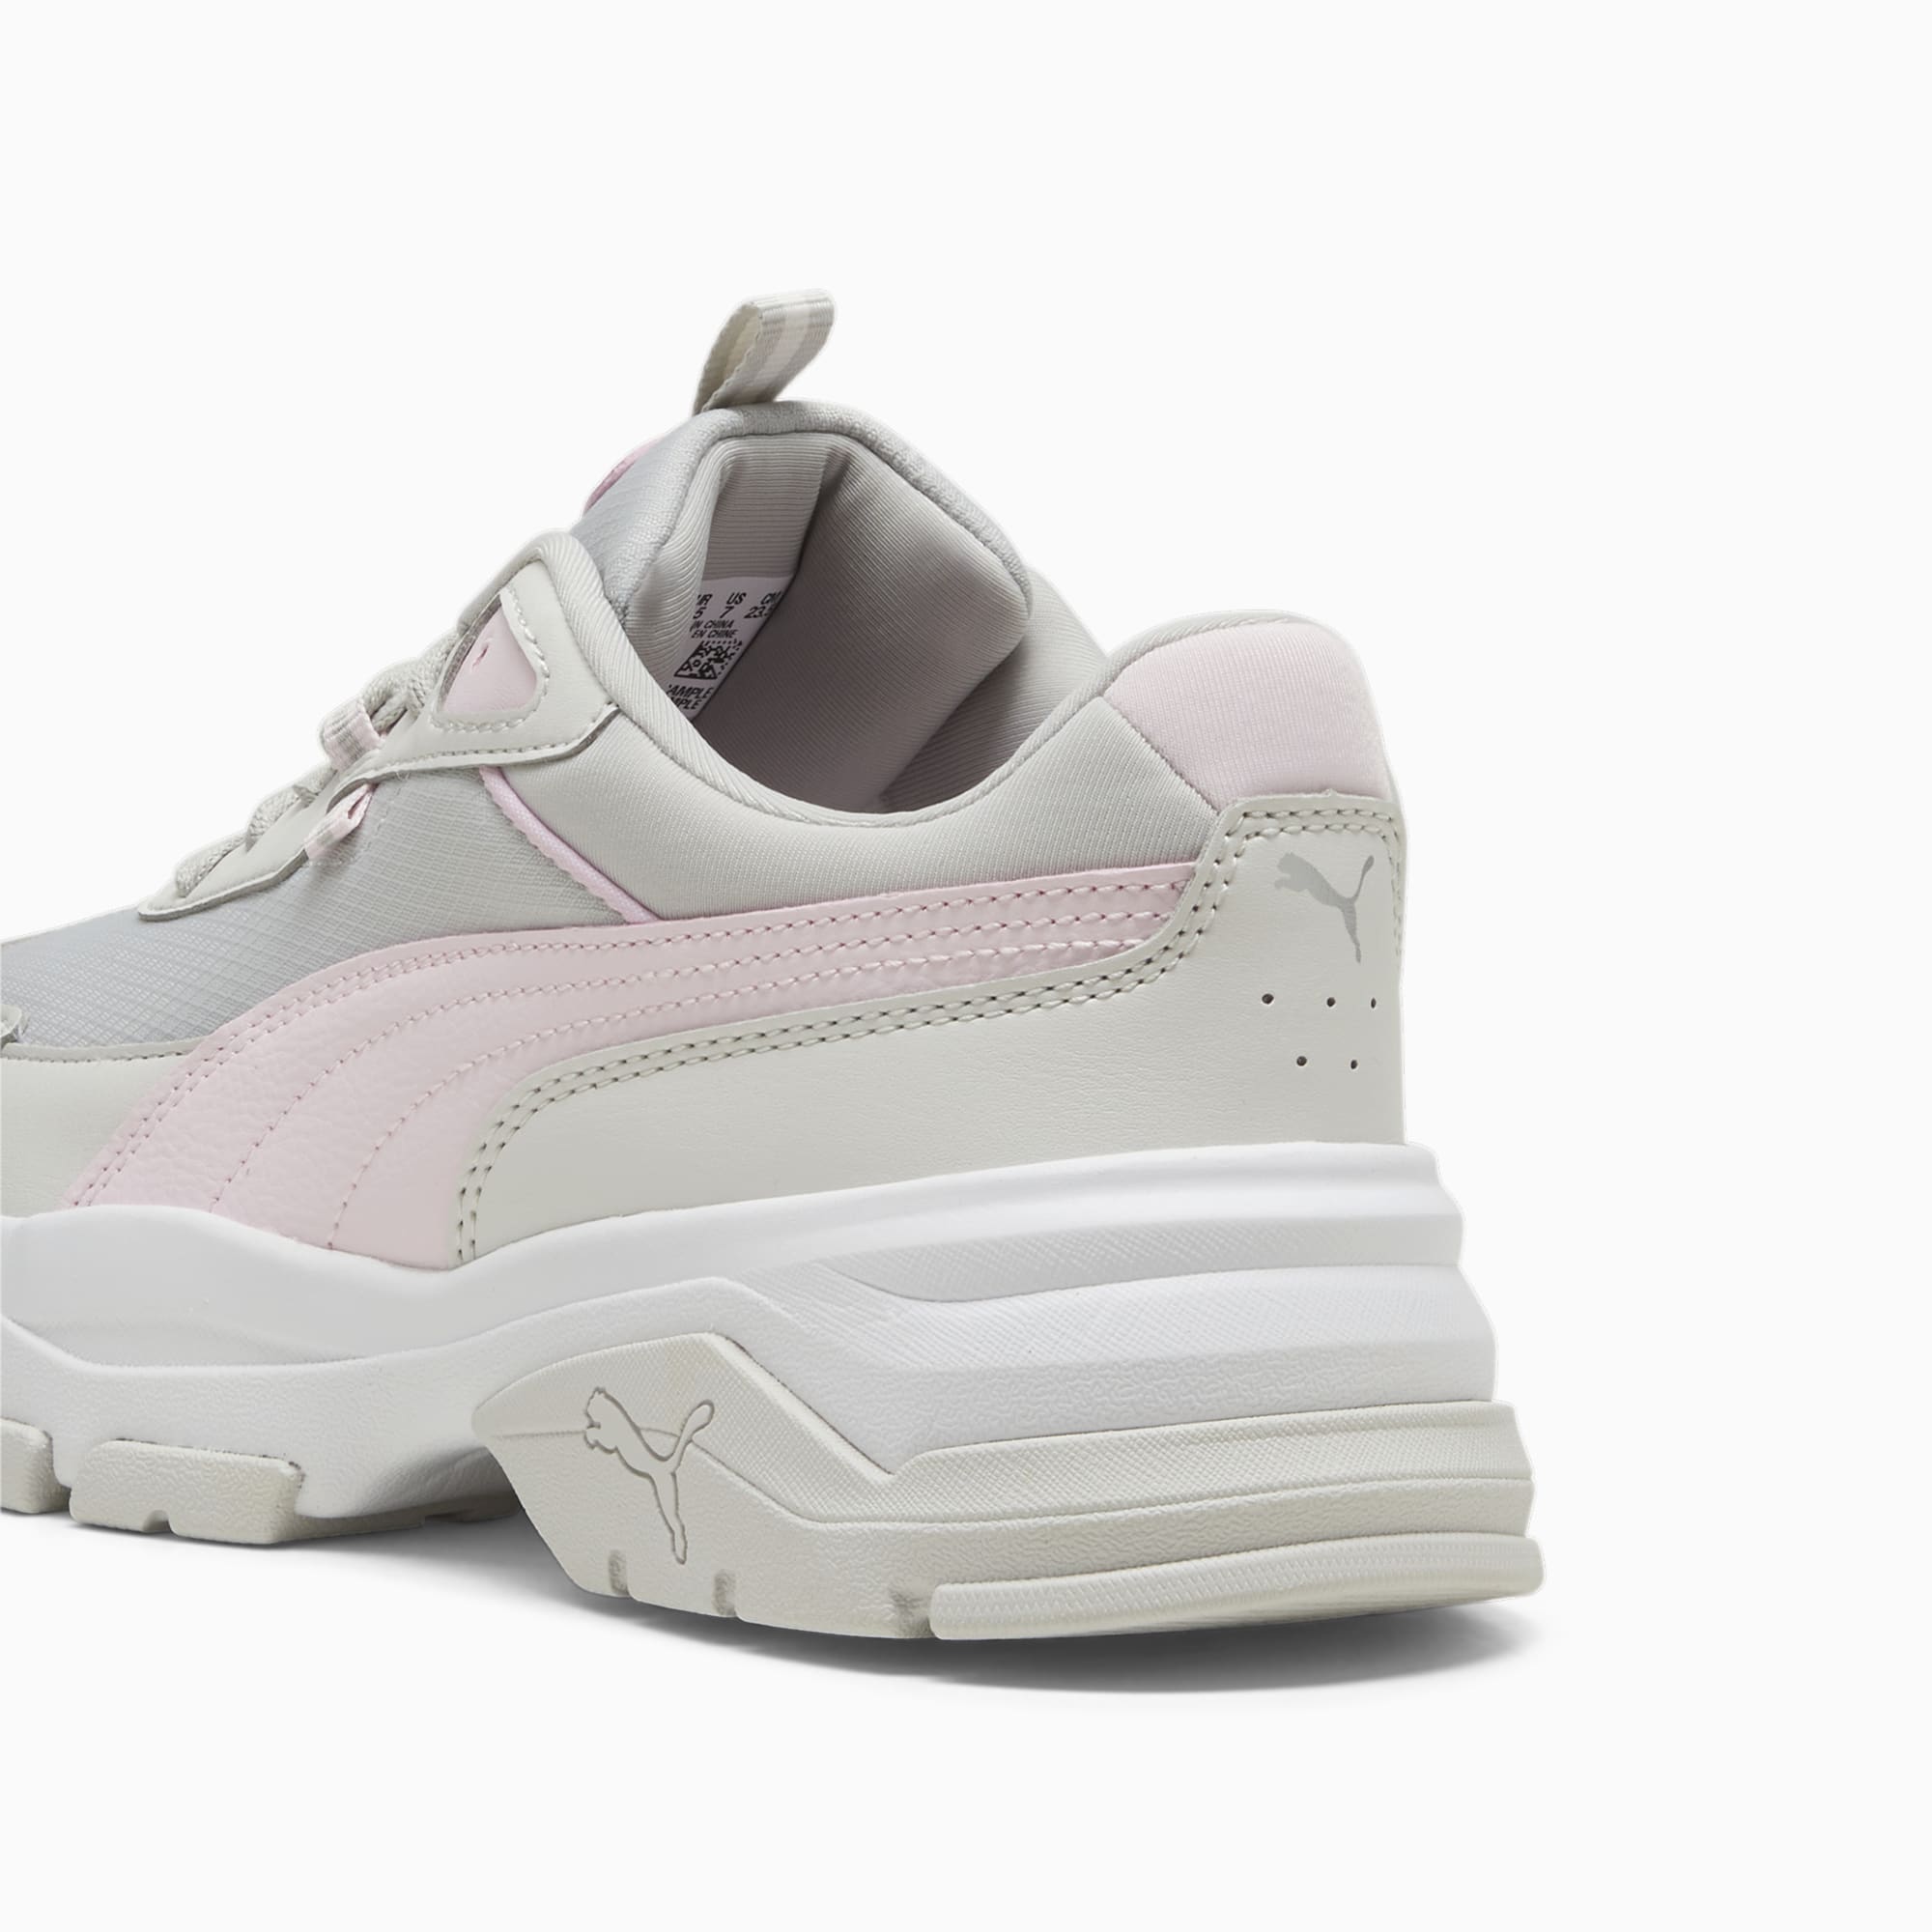 PUMA Cassia Via Sneakers Women, Feather Grey/Whisp Of Pink/Cool Light Grey, Size 35,5, Shoes